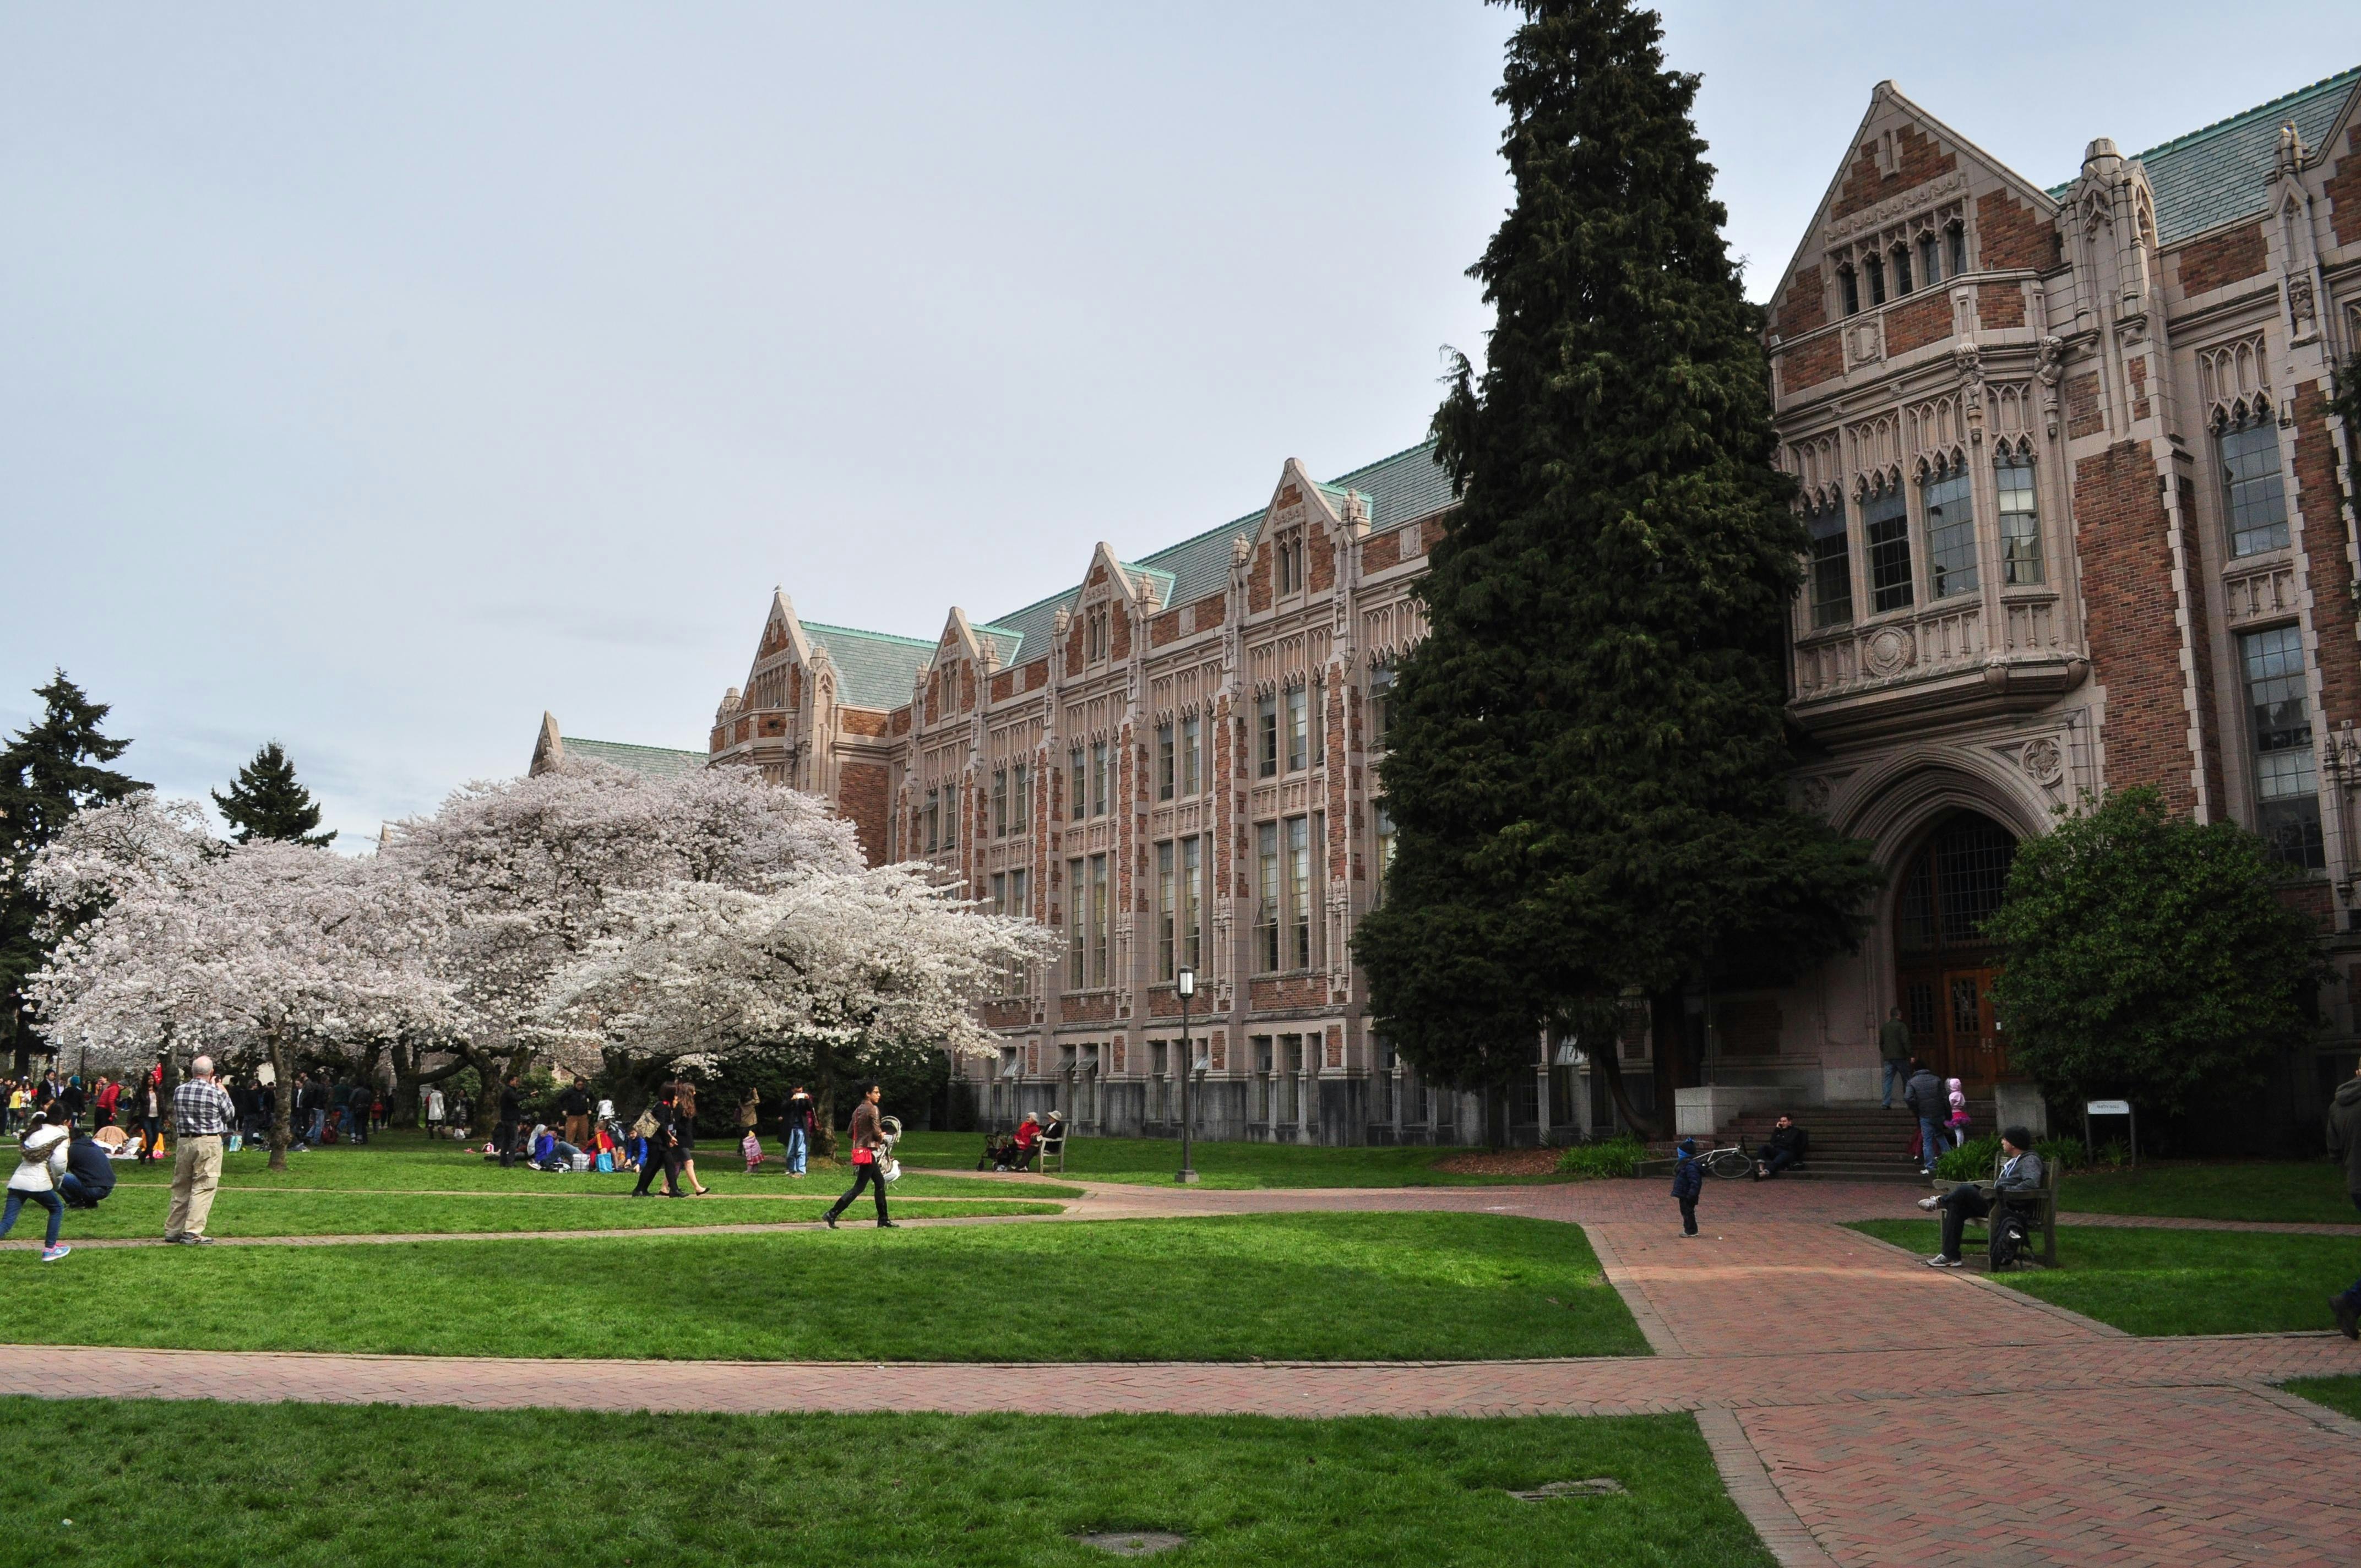 top 93+ Pictures university of washington images Latest